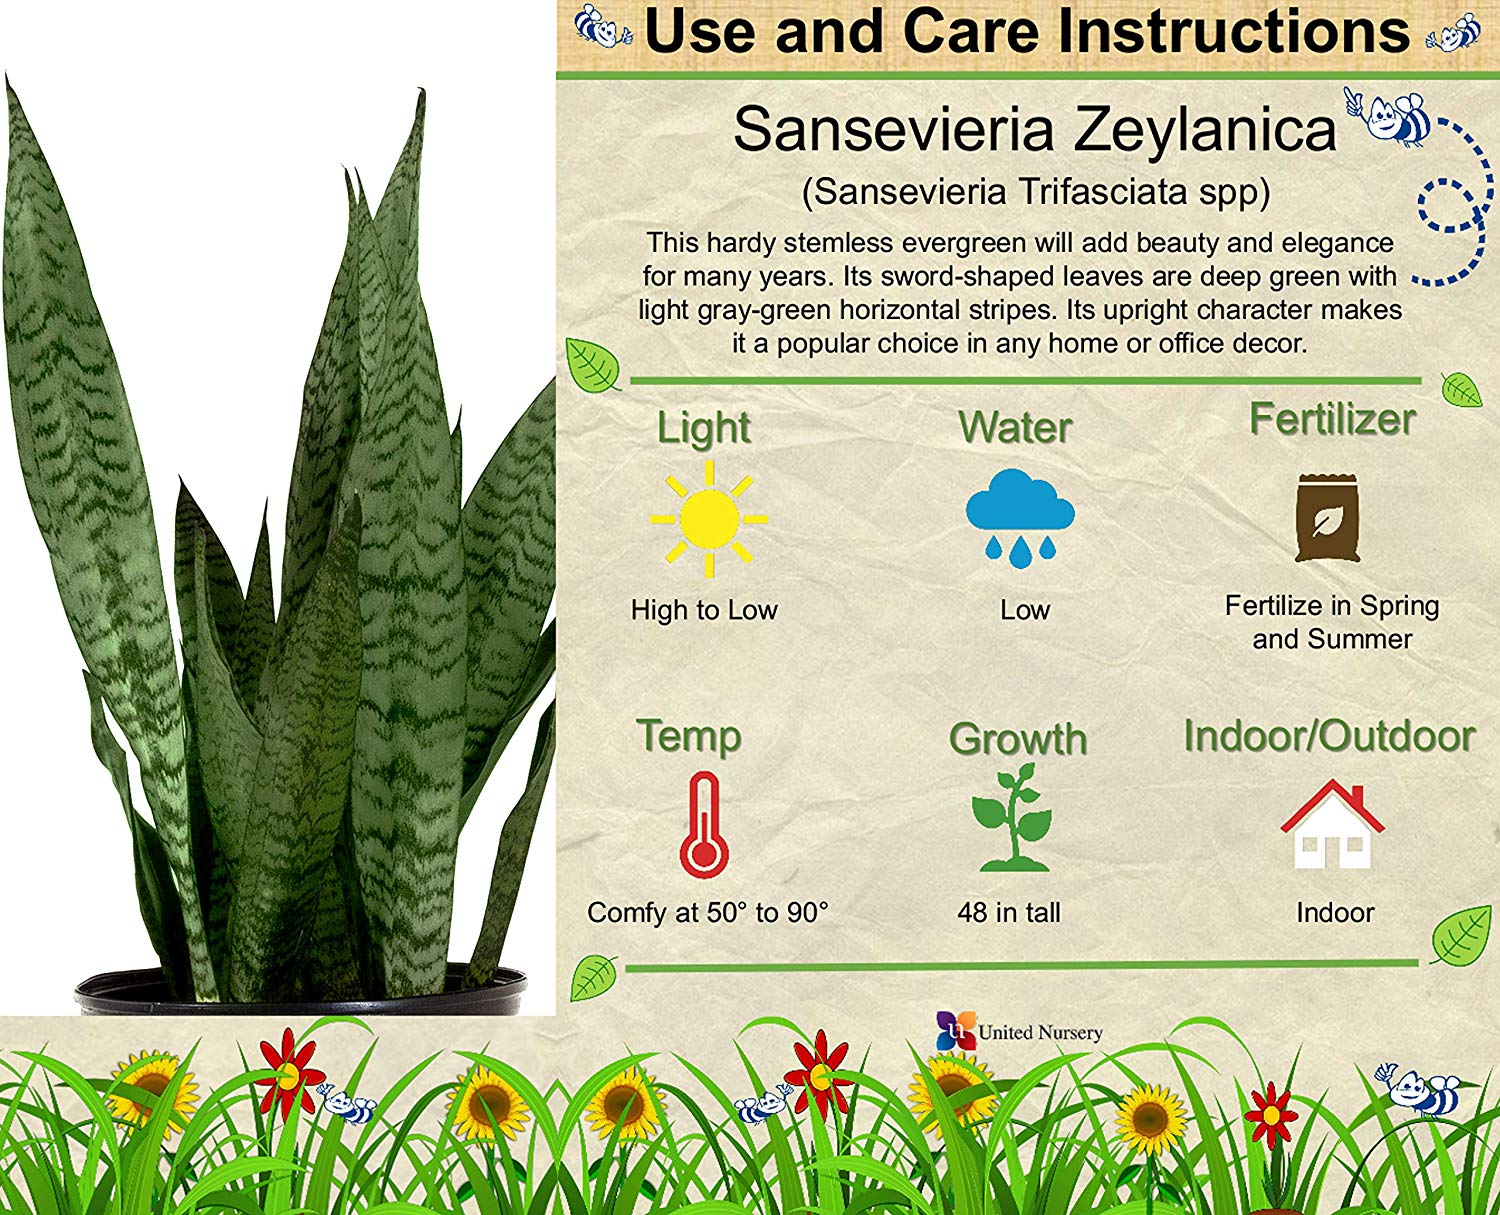 United Nursery Sansevieria Zeylanica Live Indoor Snake Plant Shipped in 6 inch Grower Pot 18-22 inch Shipping Size - image 3 of 3